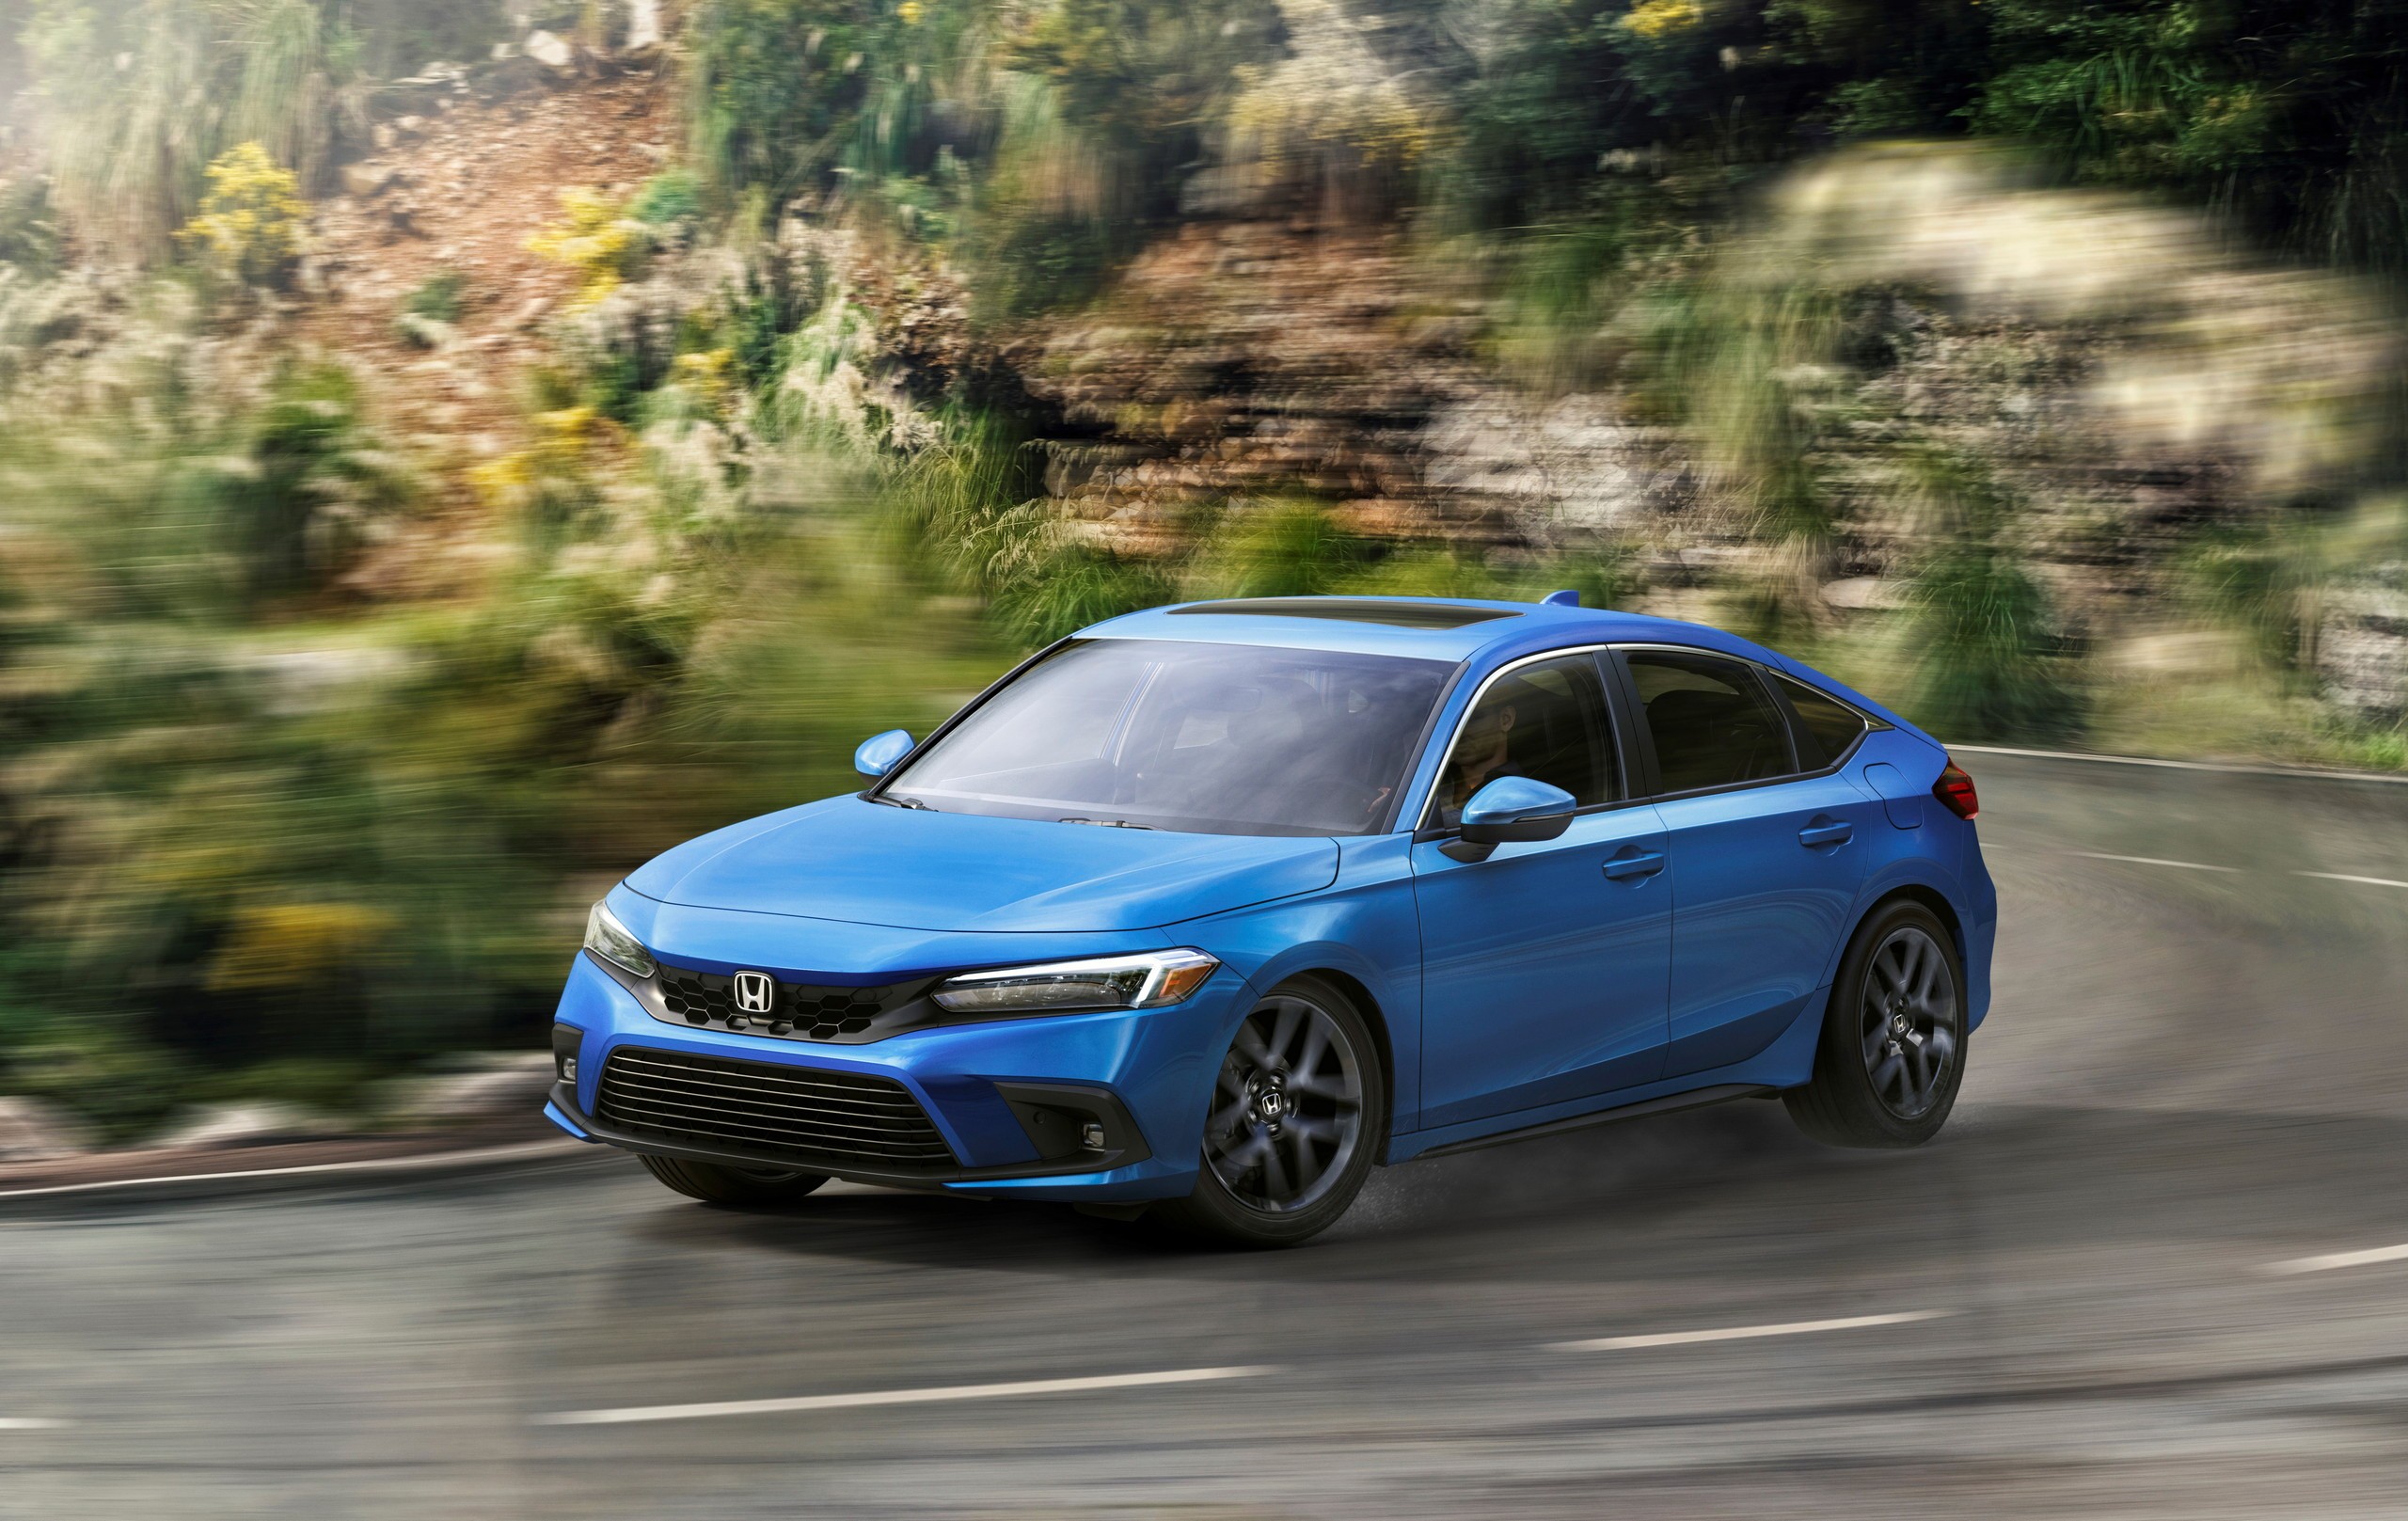 America’s 2022 Honda Civic Hatch Is Here With New Looks ...